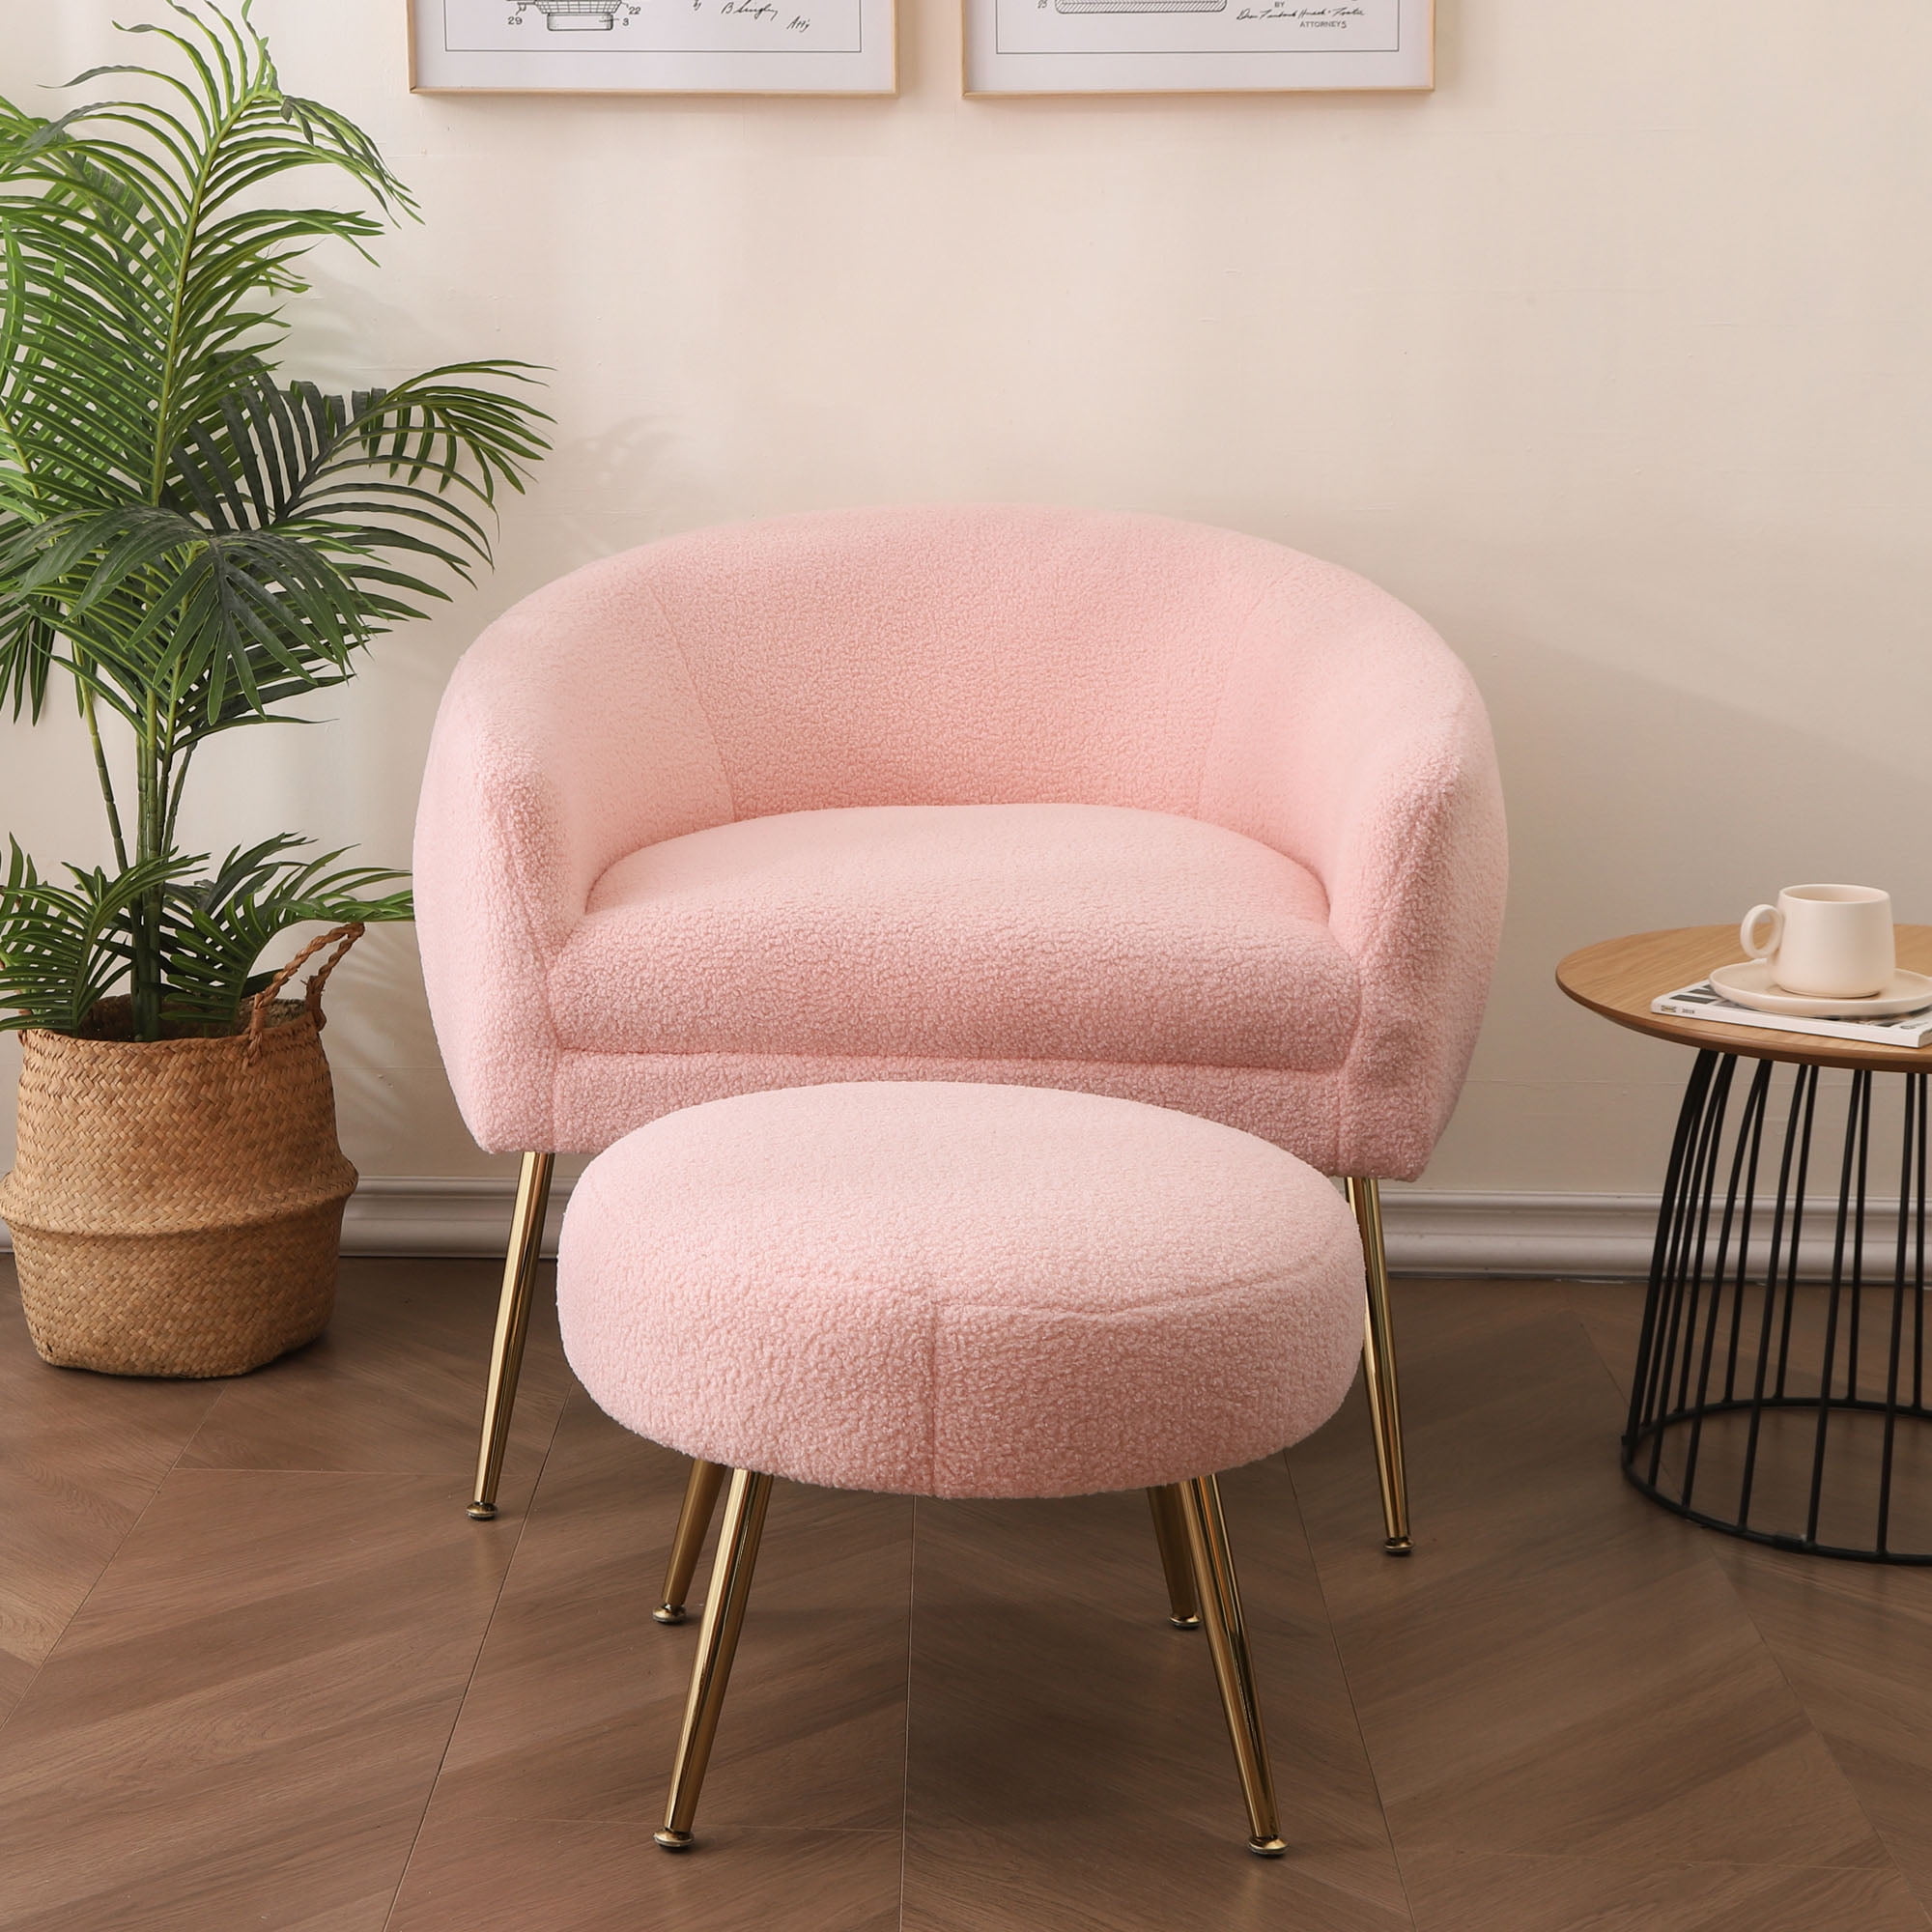 Polibi 35.2 in. Pink Velvet Accent Chair with Ottoman Foot Rest and Pillow  for Living Room,Bedroom,Office MB-PVMACORP-P - The Home Depot